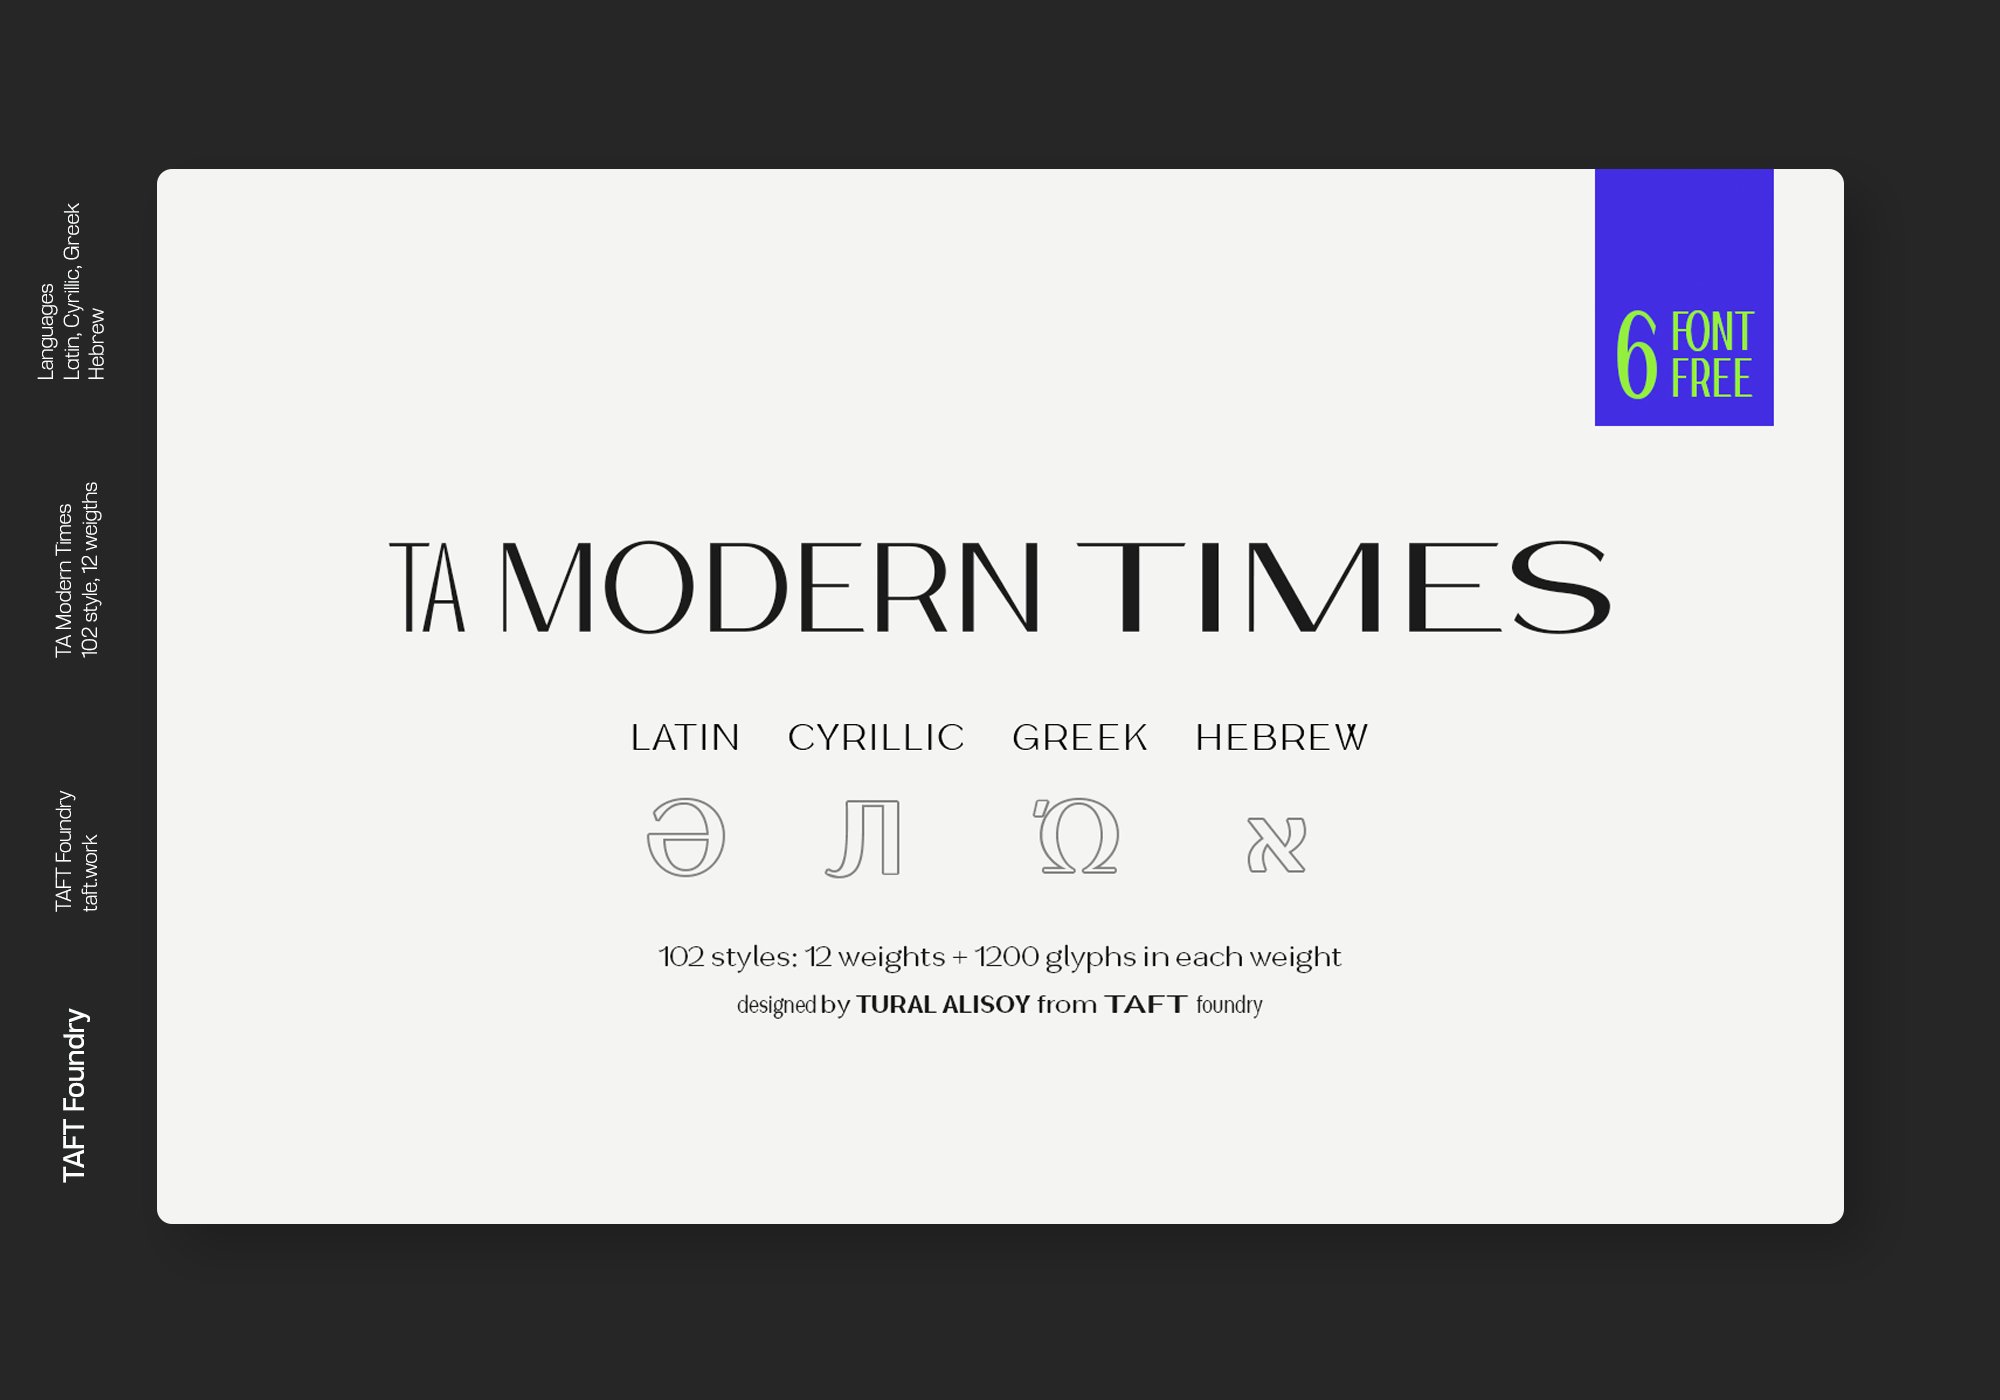 TA Modern Times Typeface cover image.